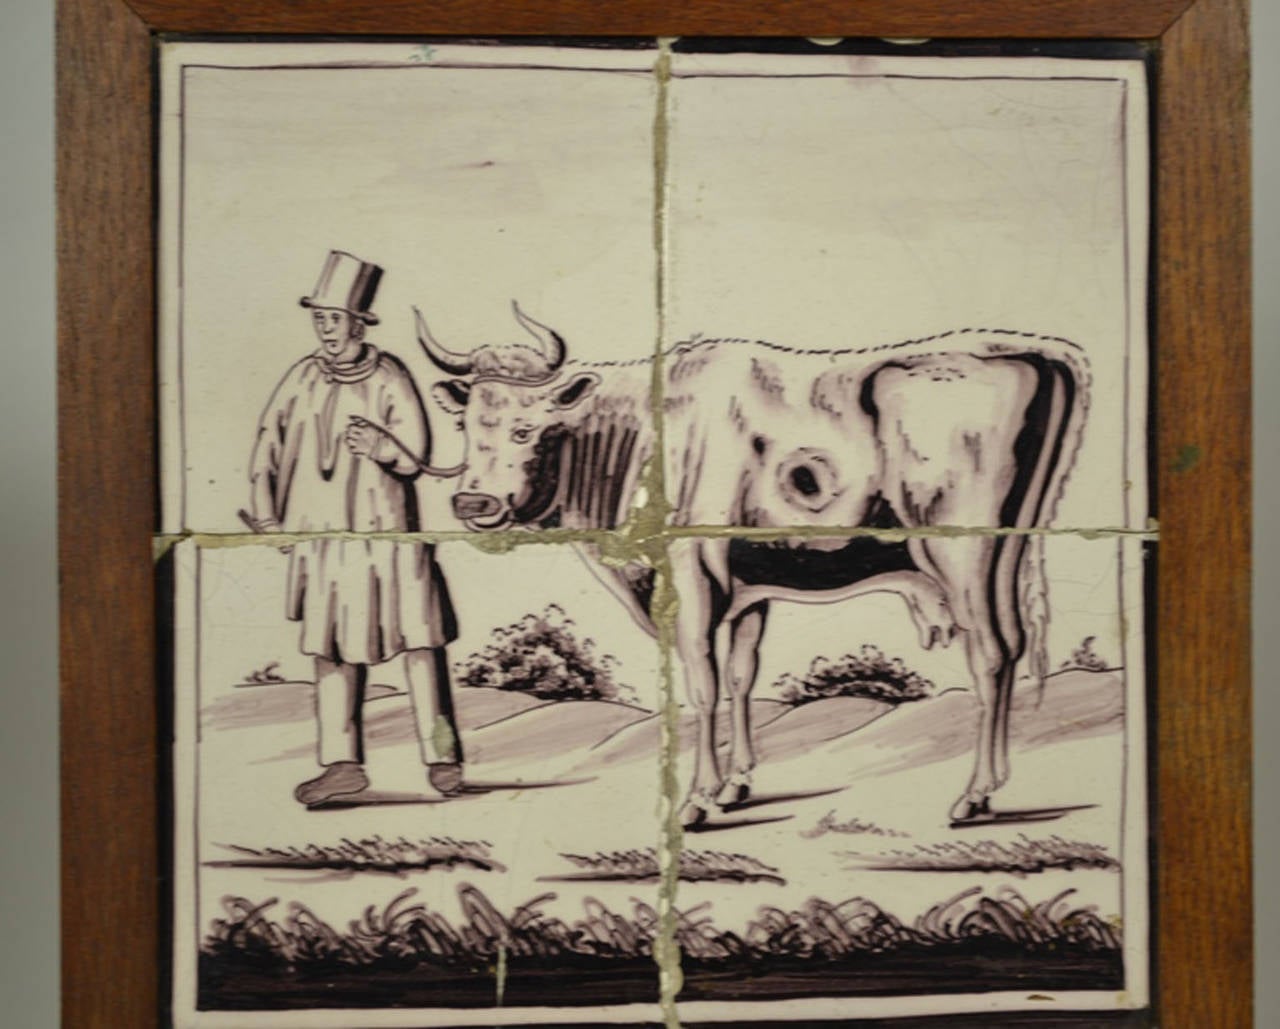 Delft tile wall picture of a cow led by a gentleman, 18th century. The color of the tile is a manganese based purple which was introduced in the later part of the 17th century and used as an alternative to the typical blue color. These tiles